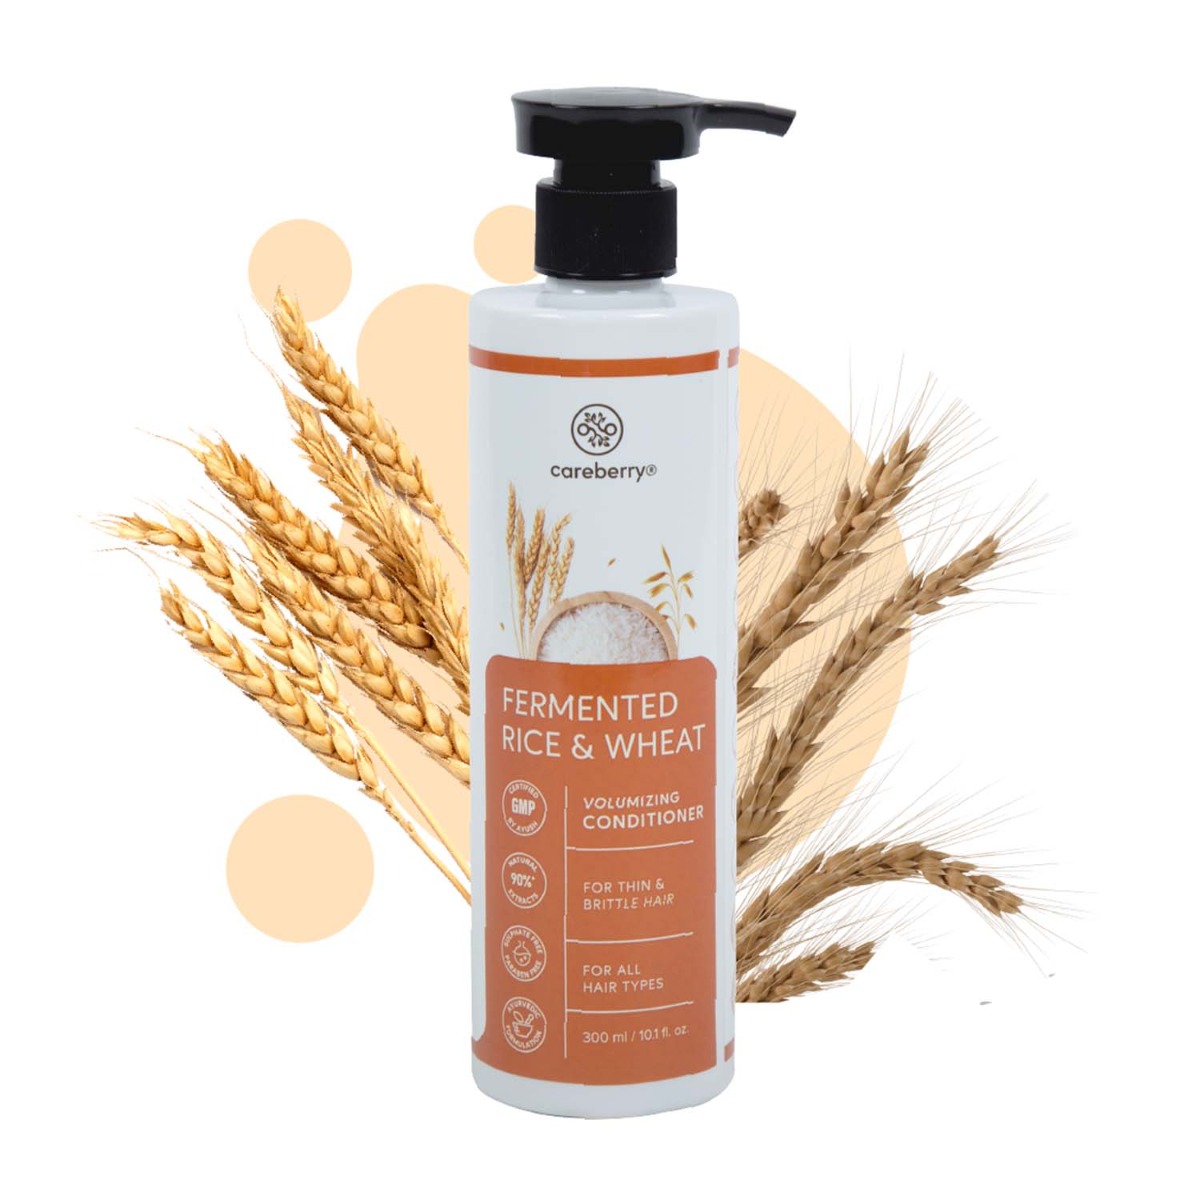 Careberry Fermented Rice Water & Wheat Volumizing Conditioner for Thin and Brittle Hair, 300ml